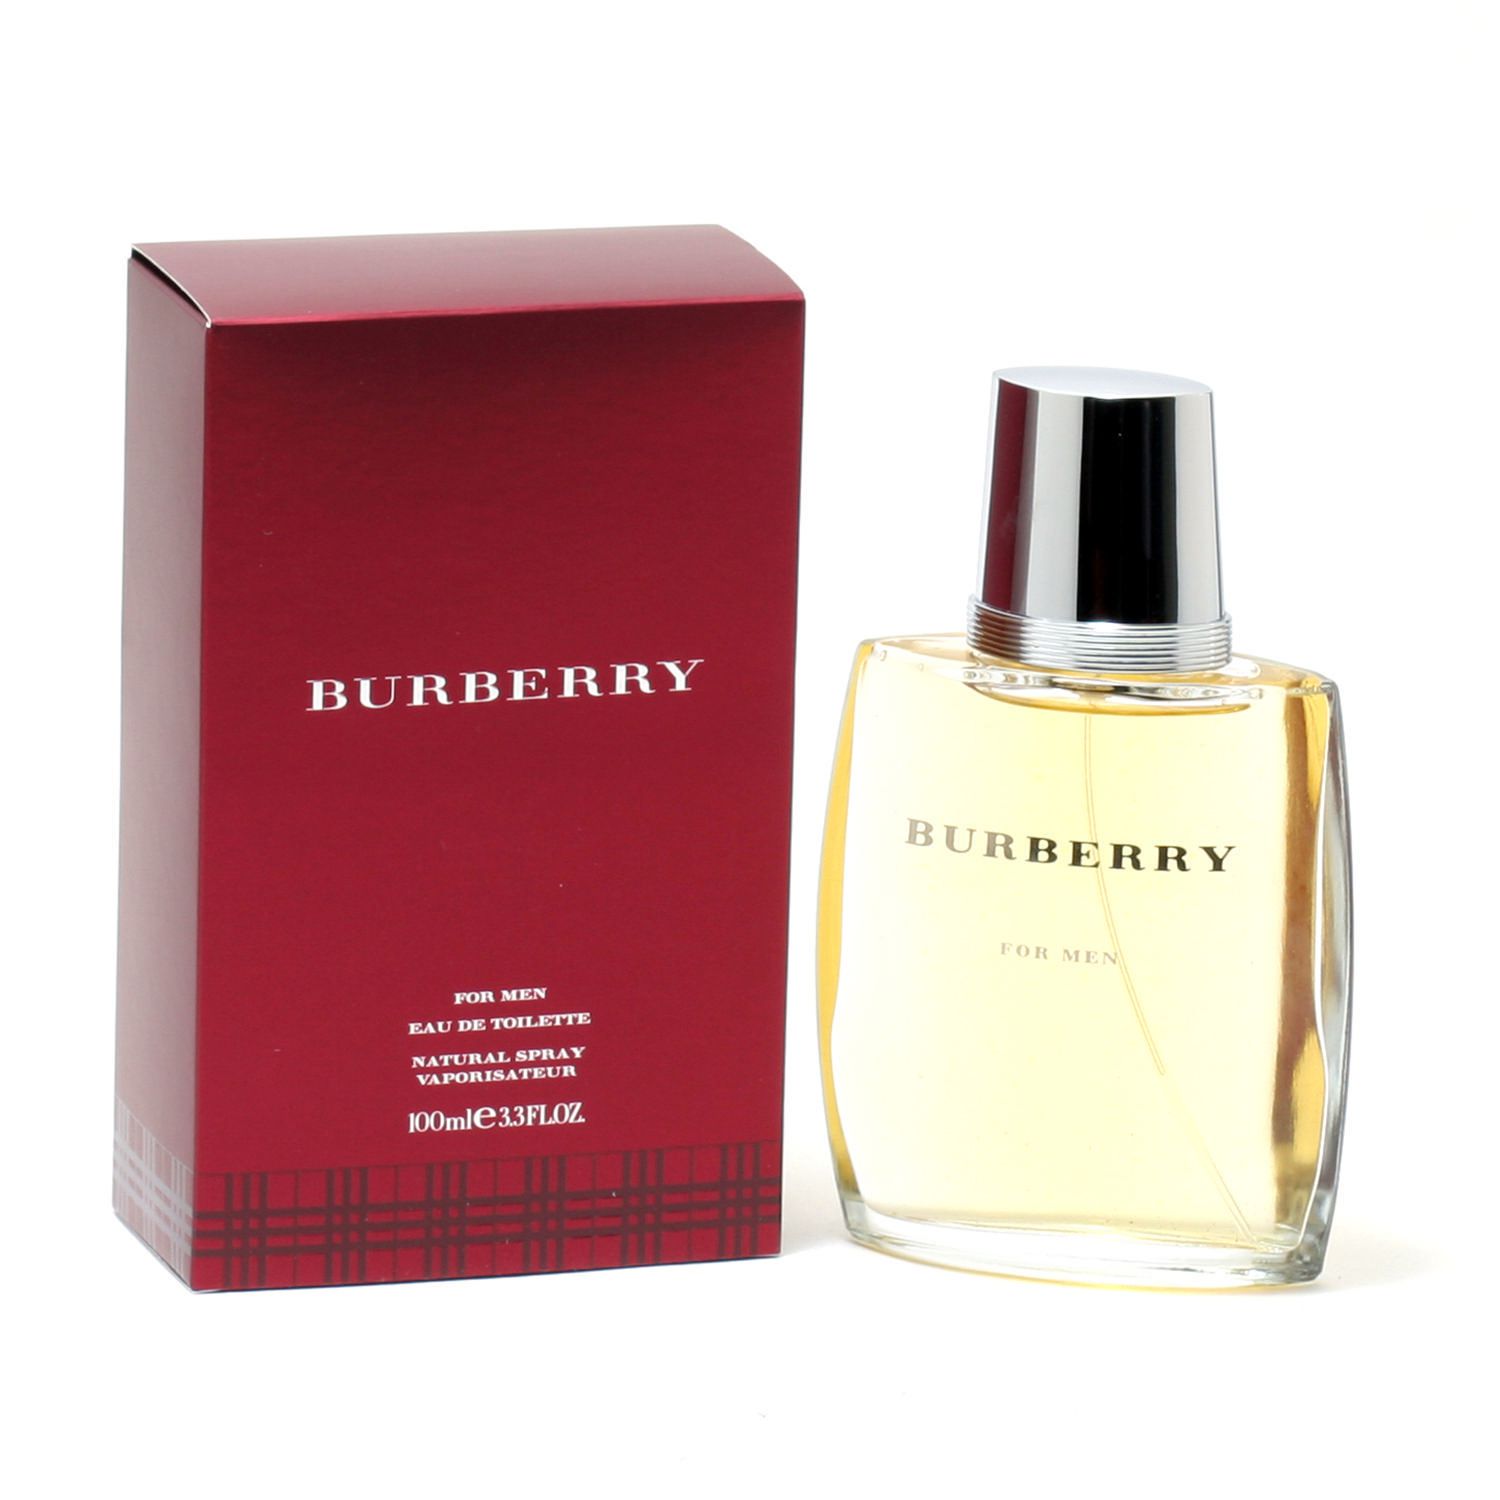 burberry for men's cologne review